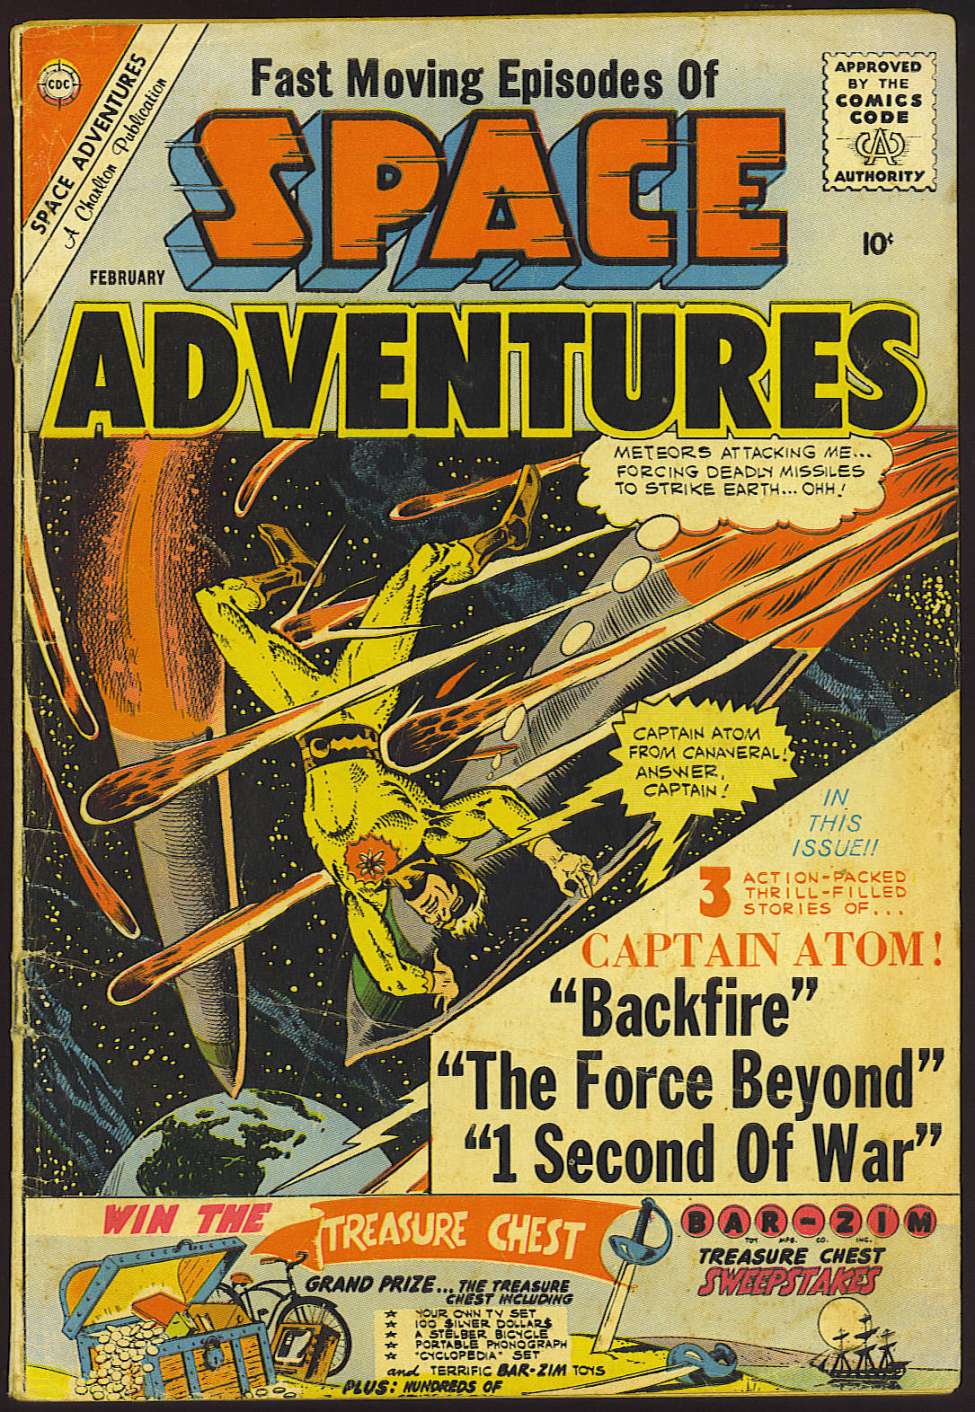 Book Cover For Space Adventures 38 - Version 1